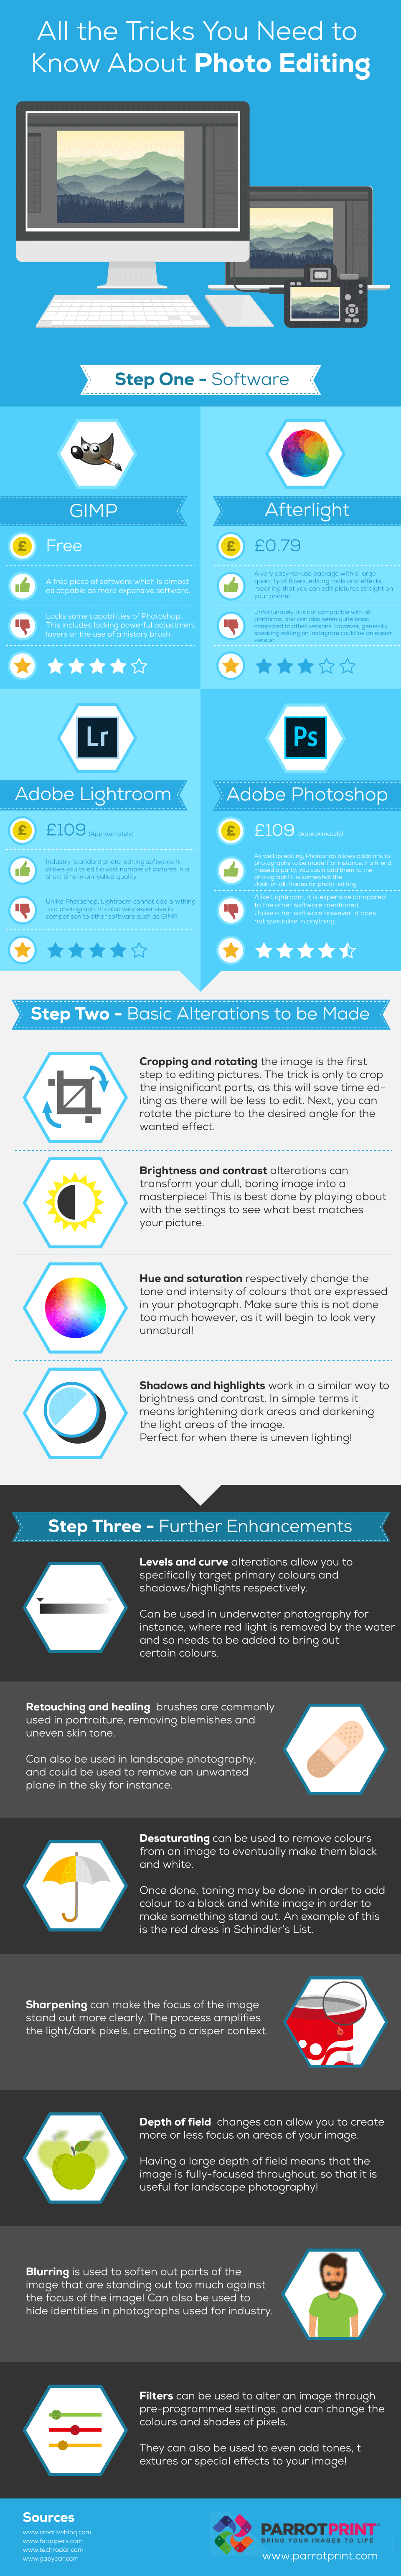 Photo editing tips and tricks infographic